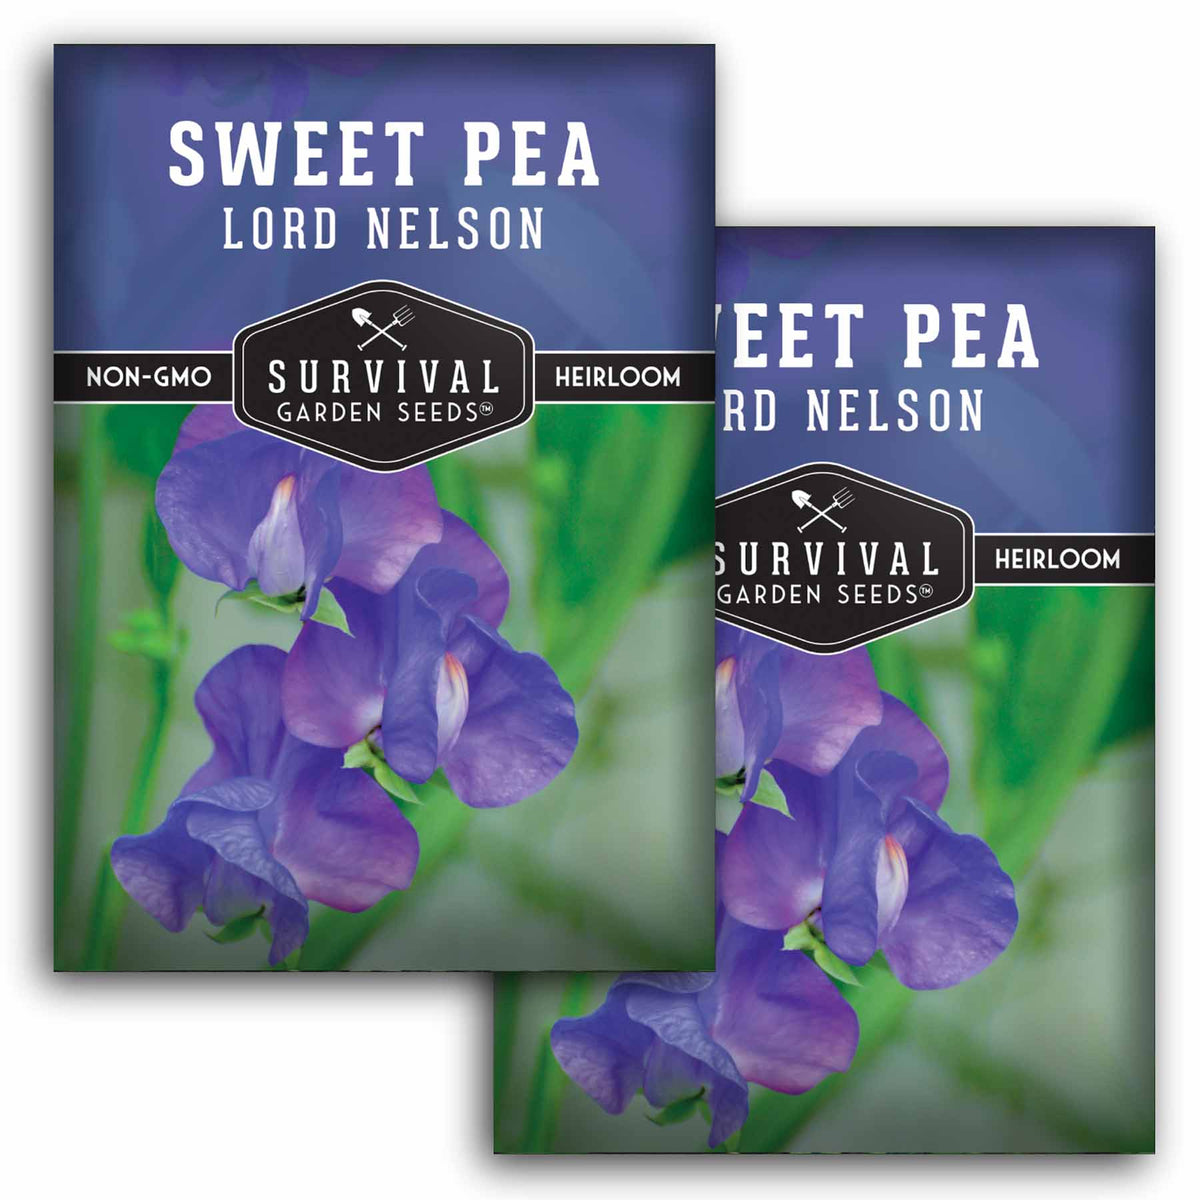 2 packets of Lord Nelson Sweet Pea seeds